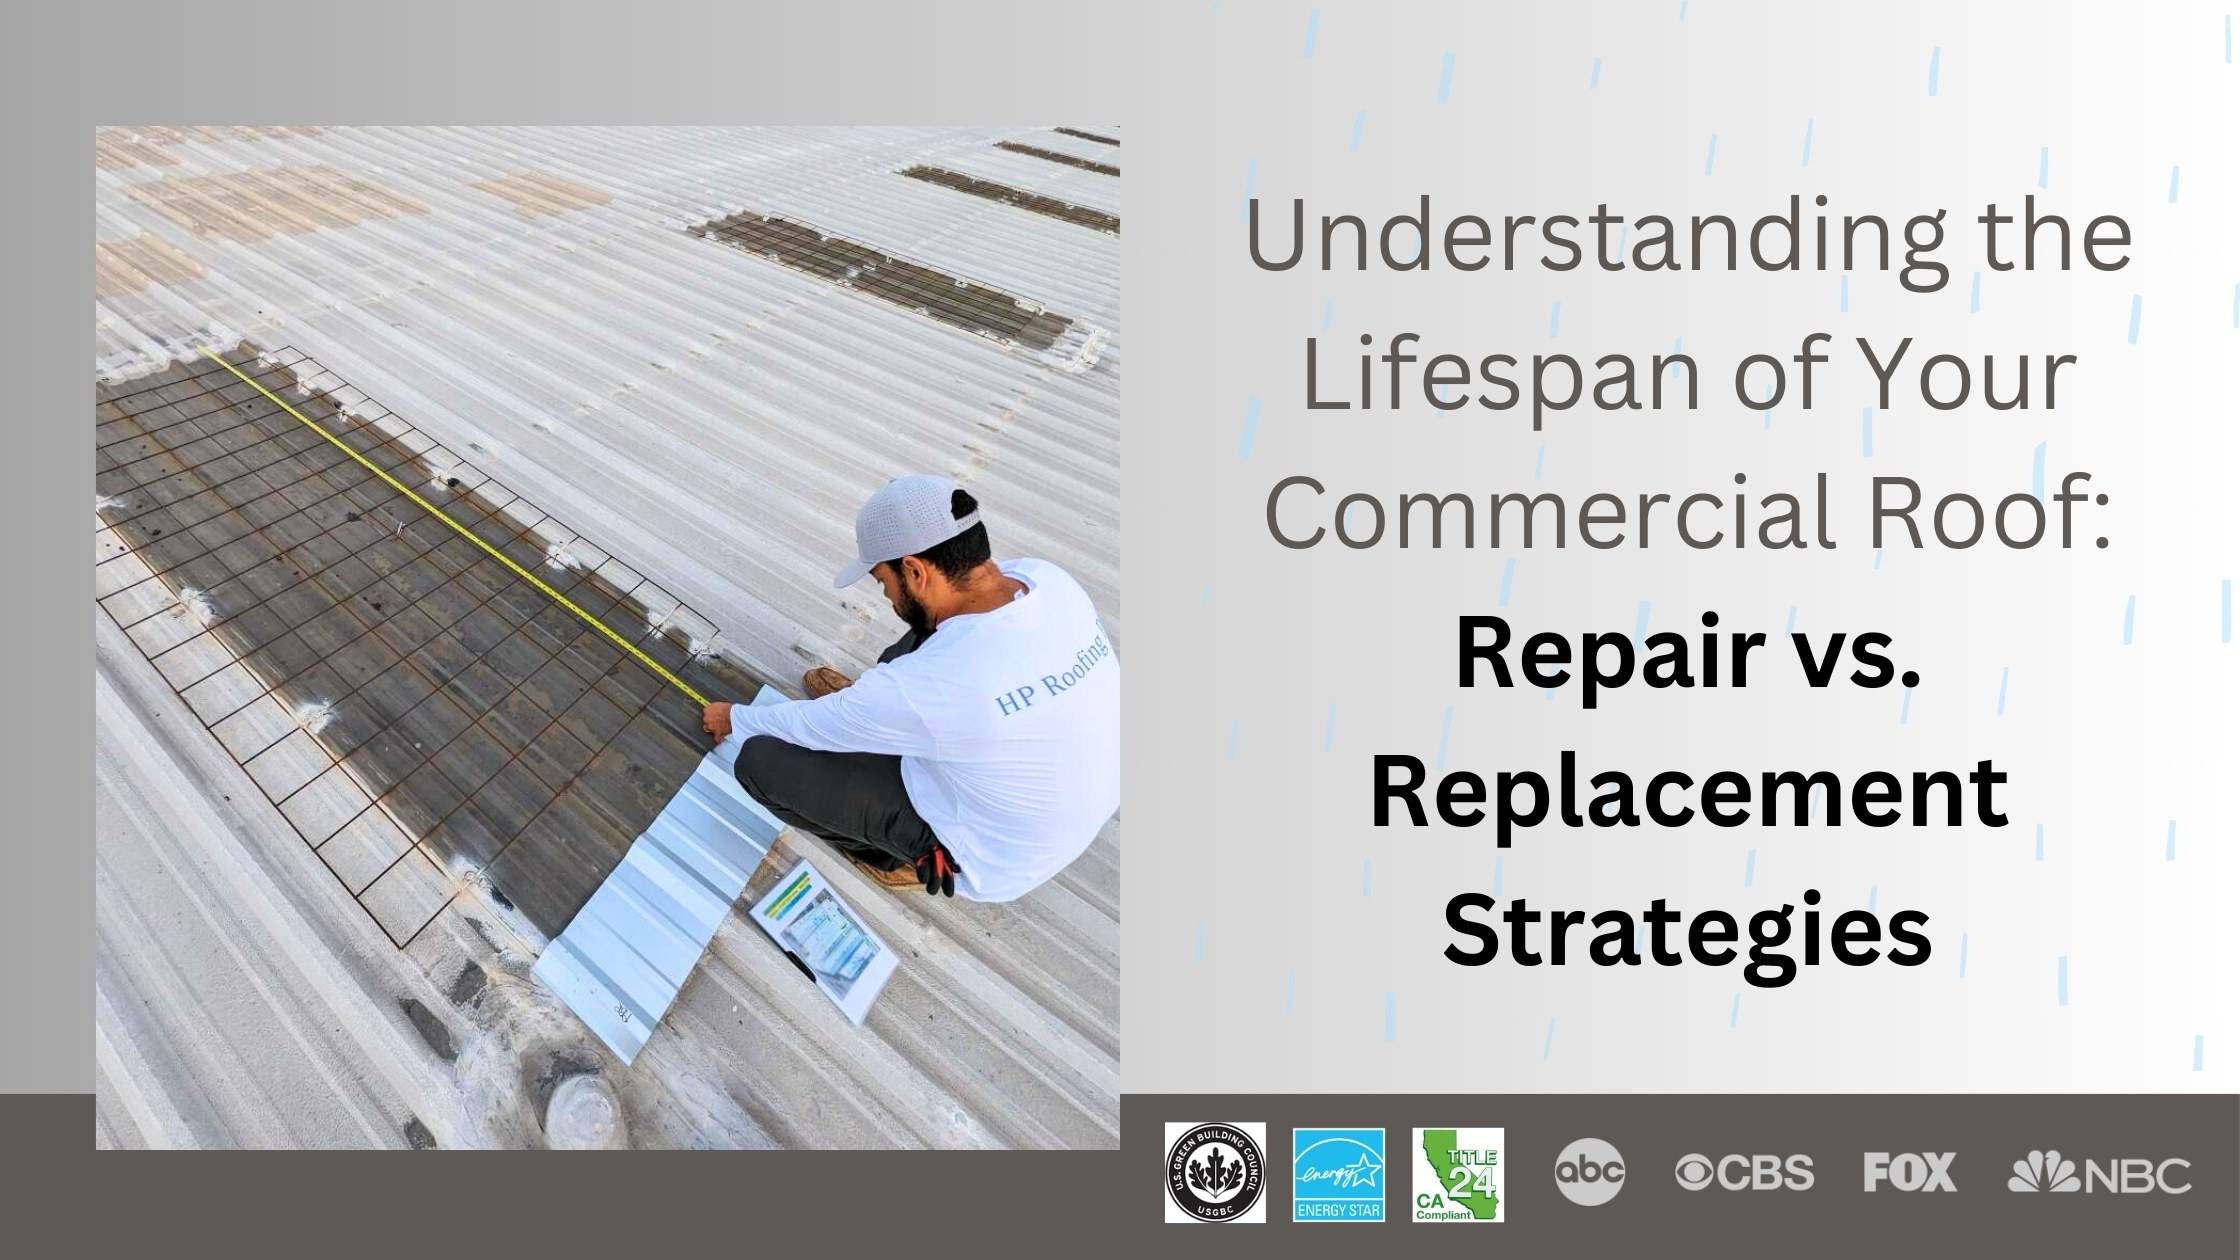 Understanding the Lifespan of Your Commercial Roof: Repair vs. Replacement Strategies